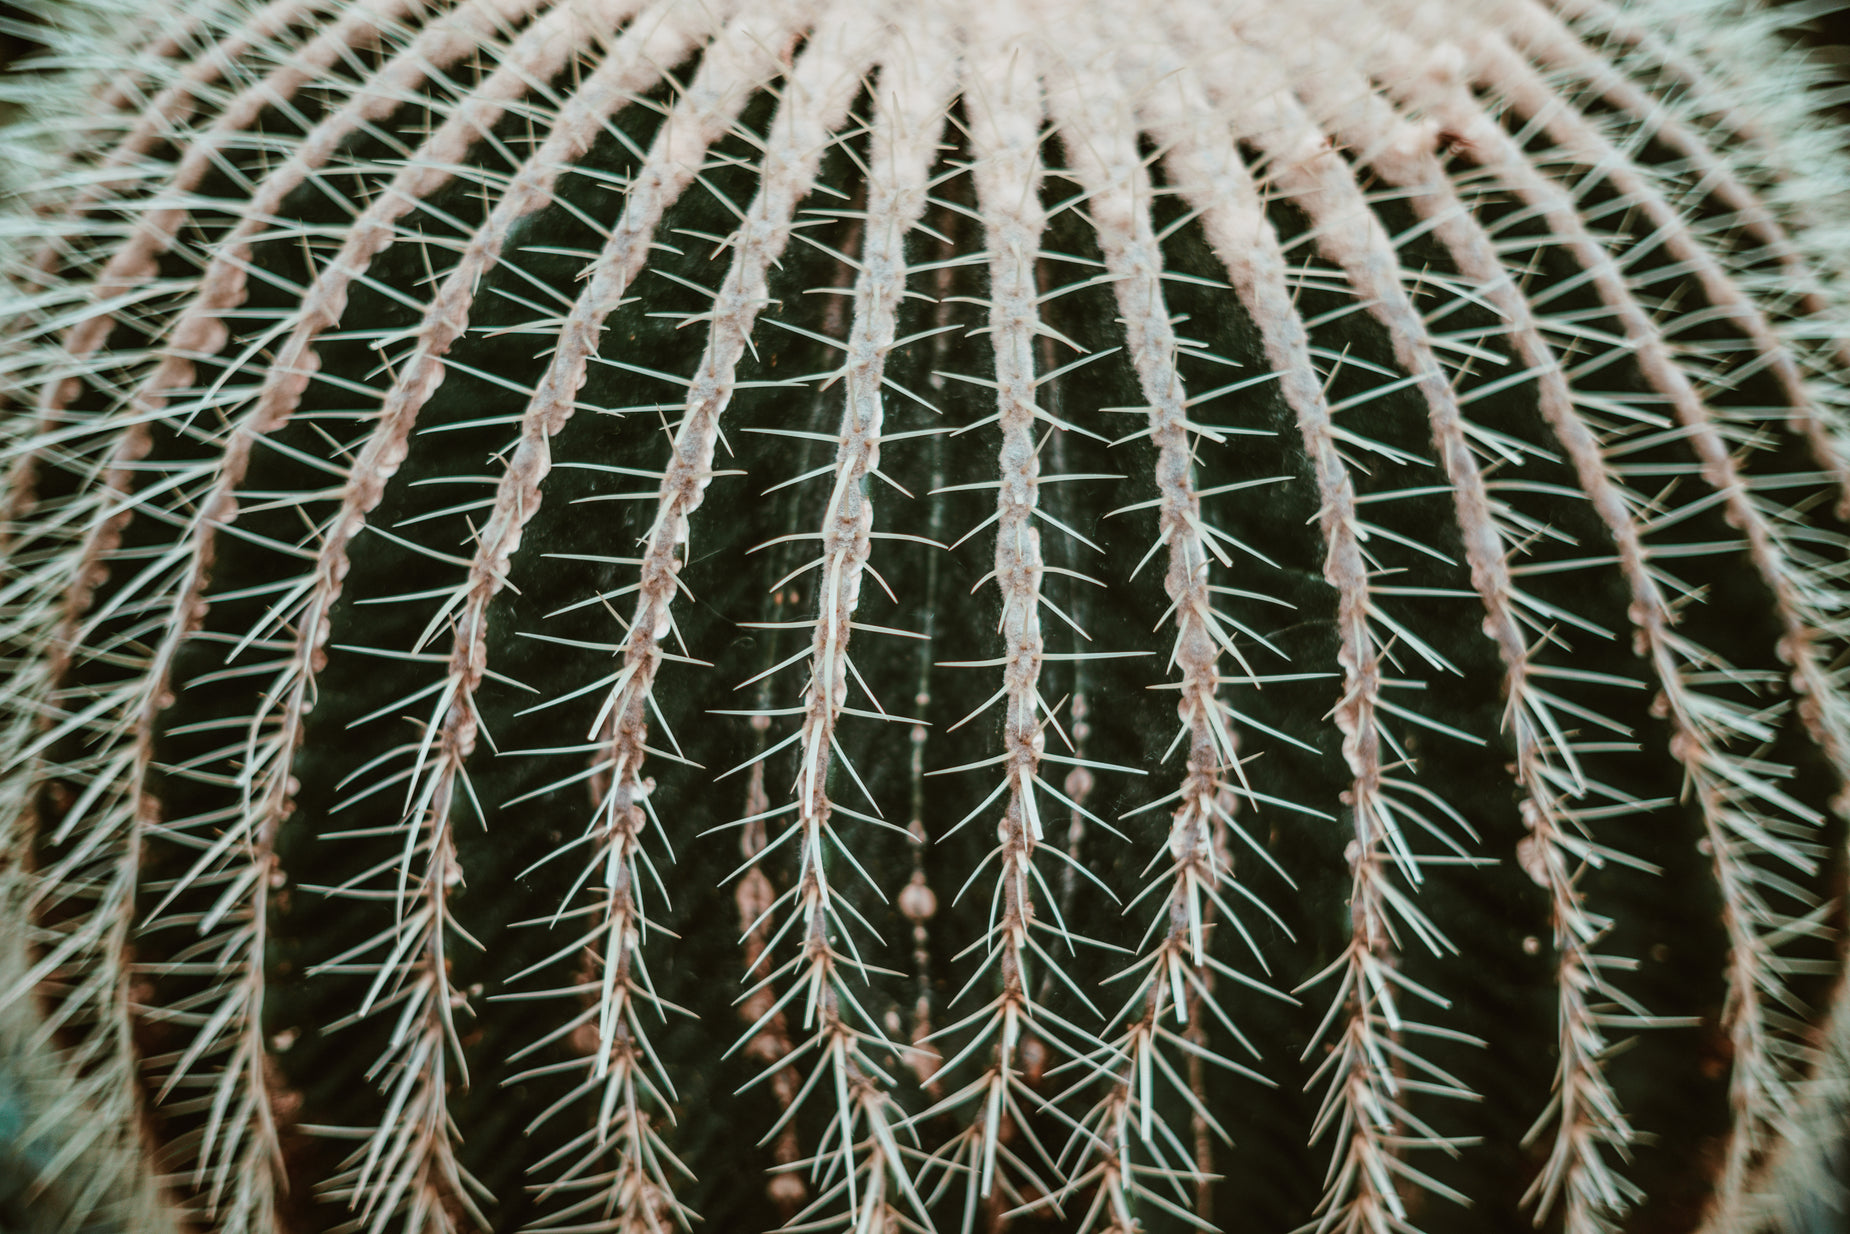 a green cactus is shown with many sharp needles